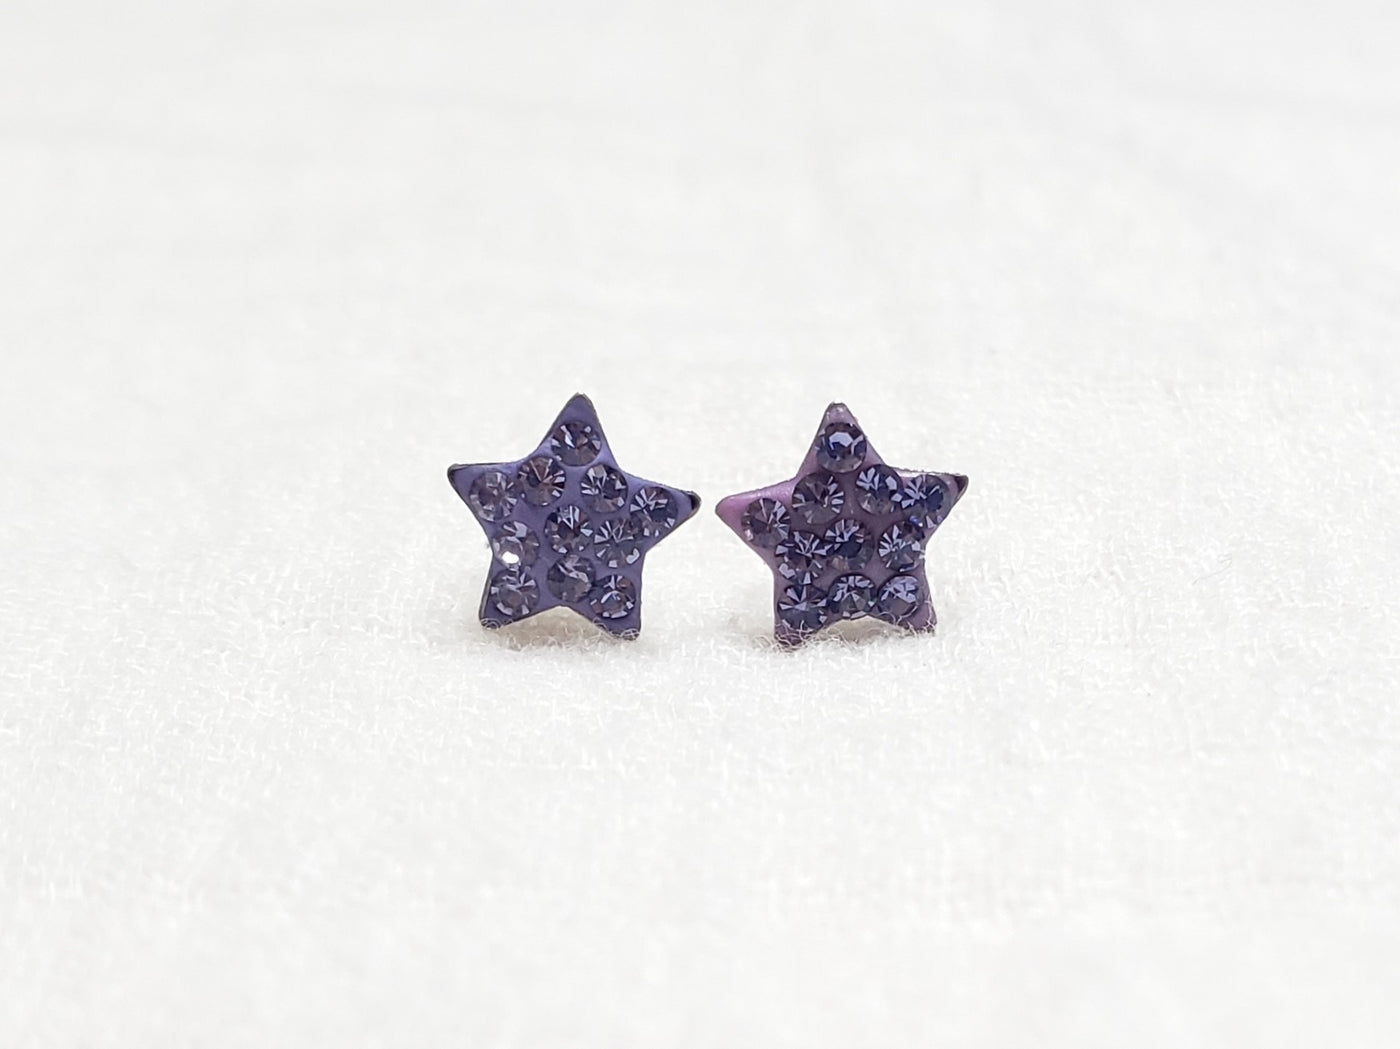 Crystal Star Pave Stud Silver Earrings in Tanzanite | Annie and Sisters| sister stud earrings, for kids, children's jewelry, kids jewelry, best friend 